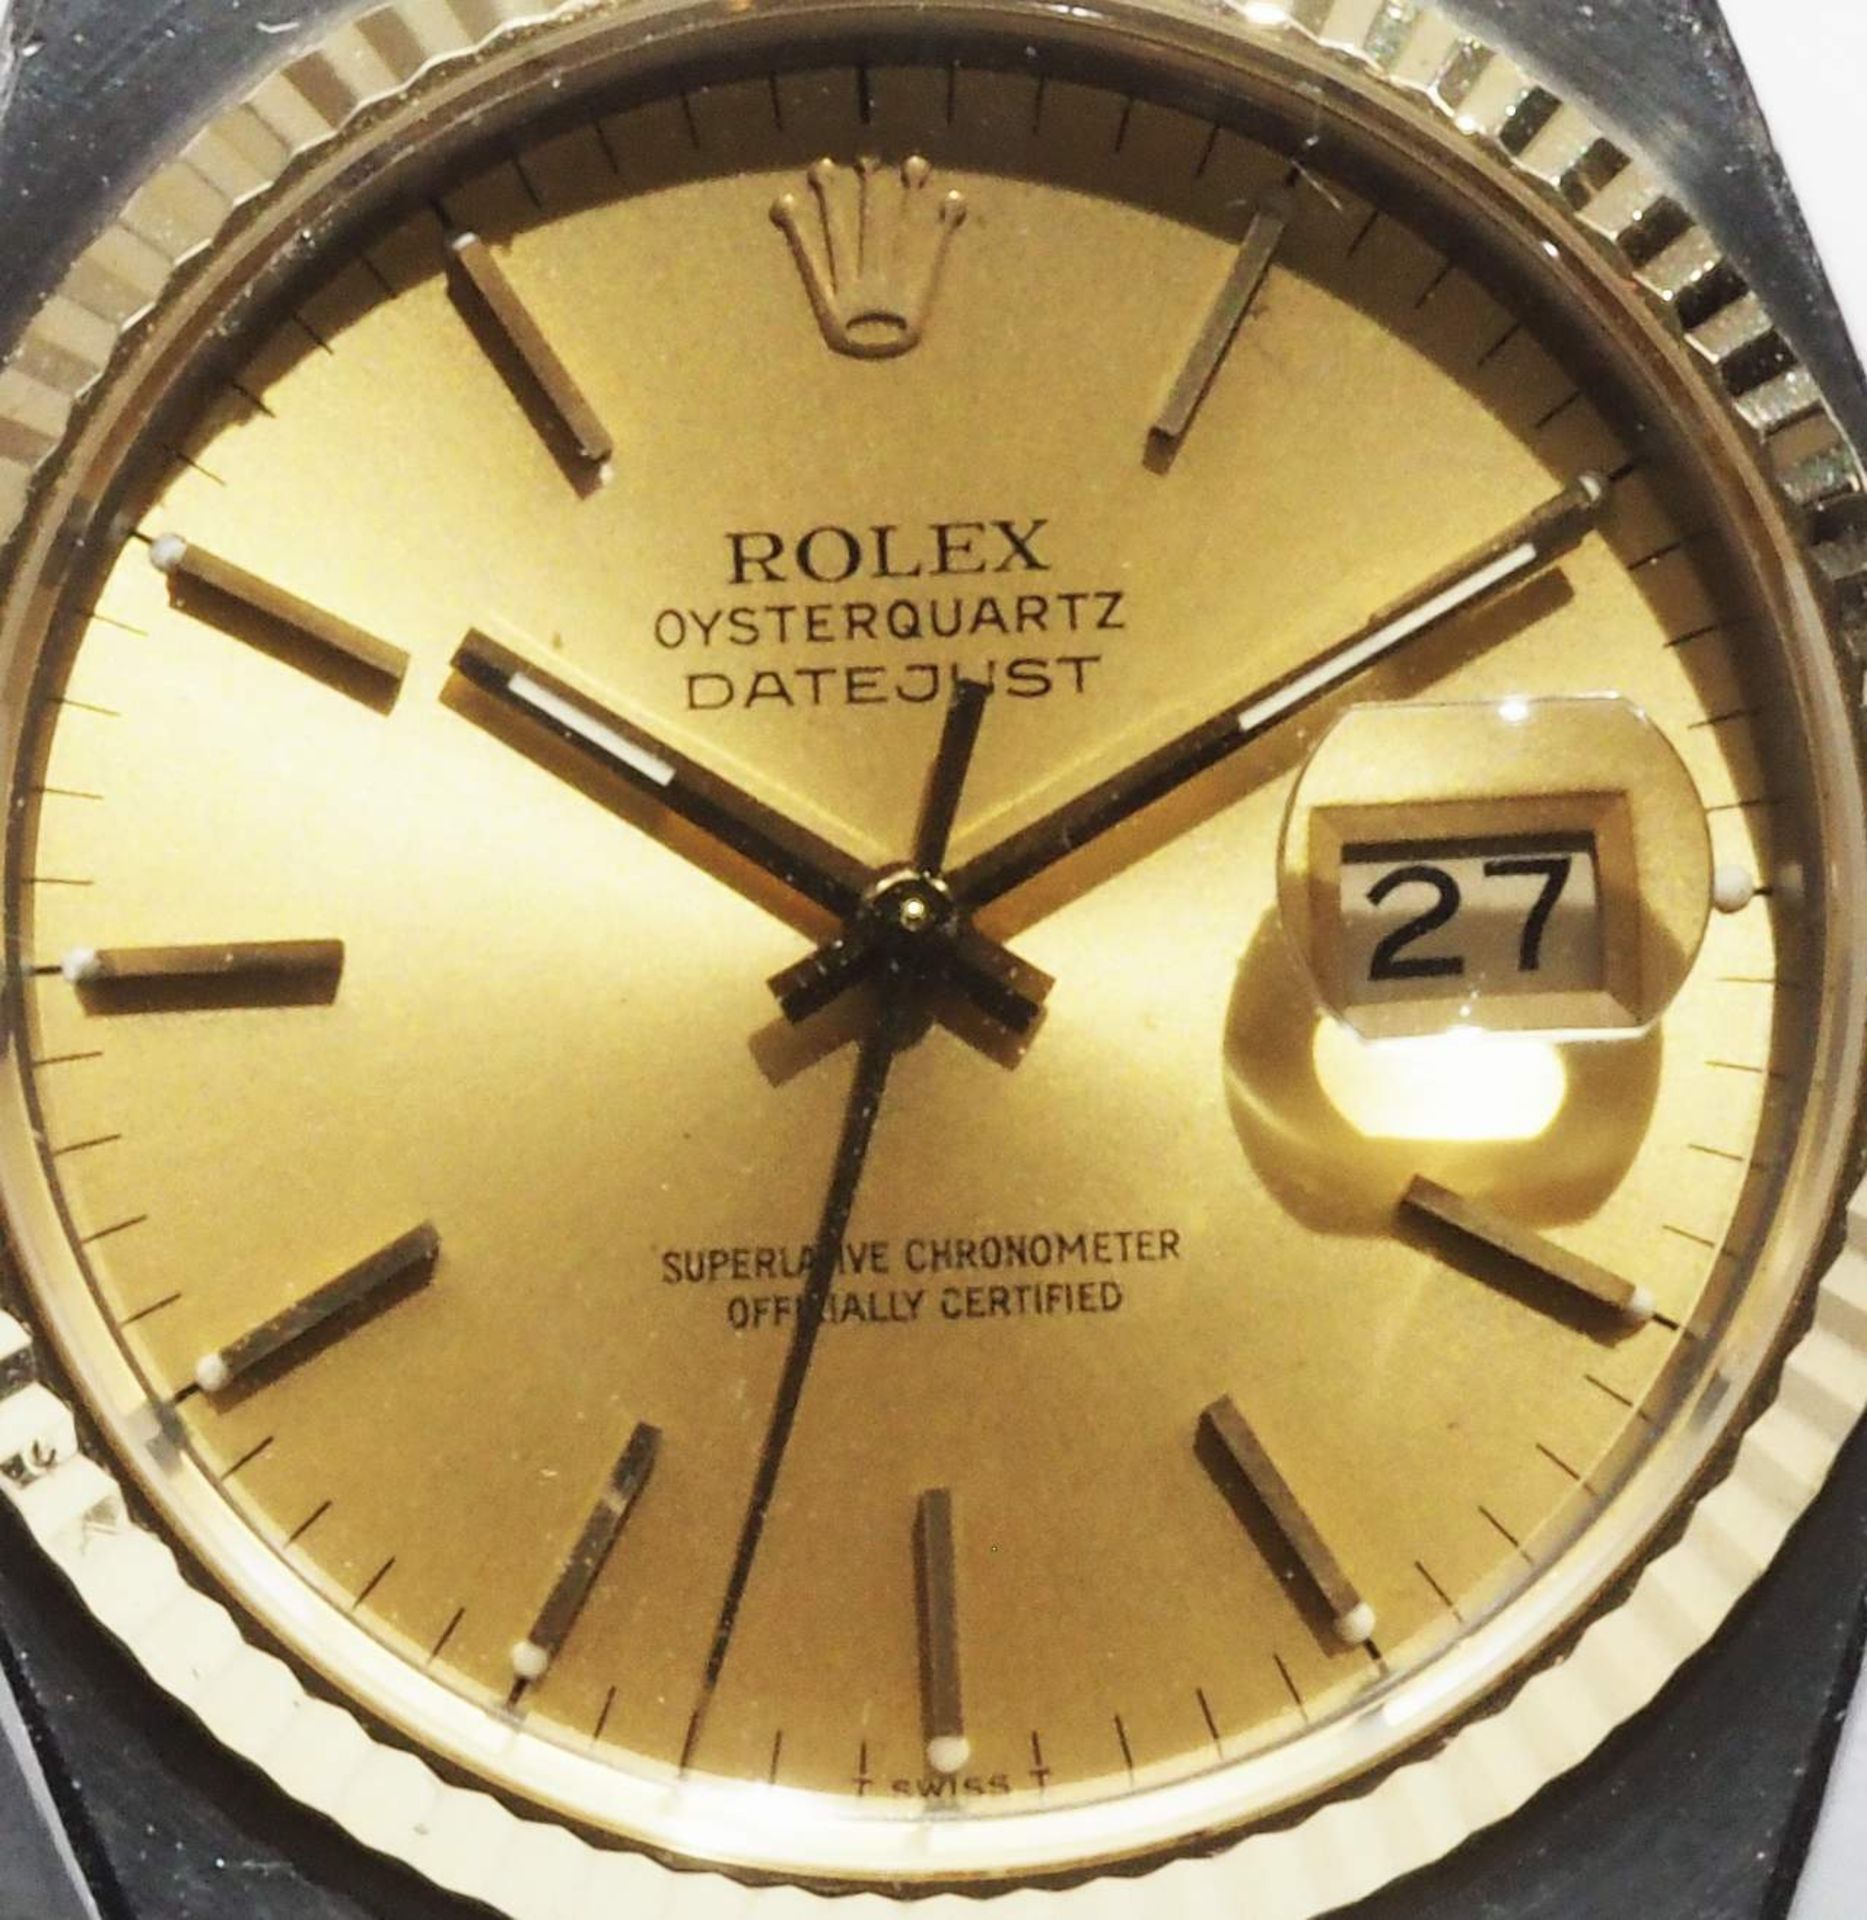 ROLEX Datejust Oysterquarz. - Image 4 of 12